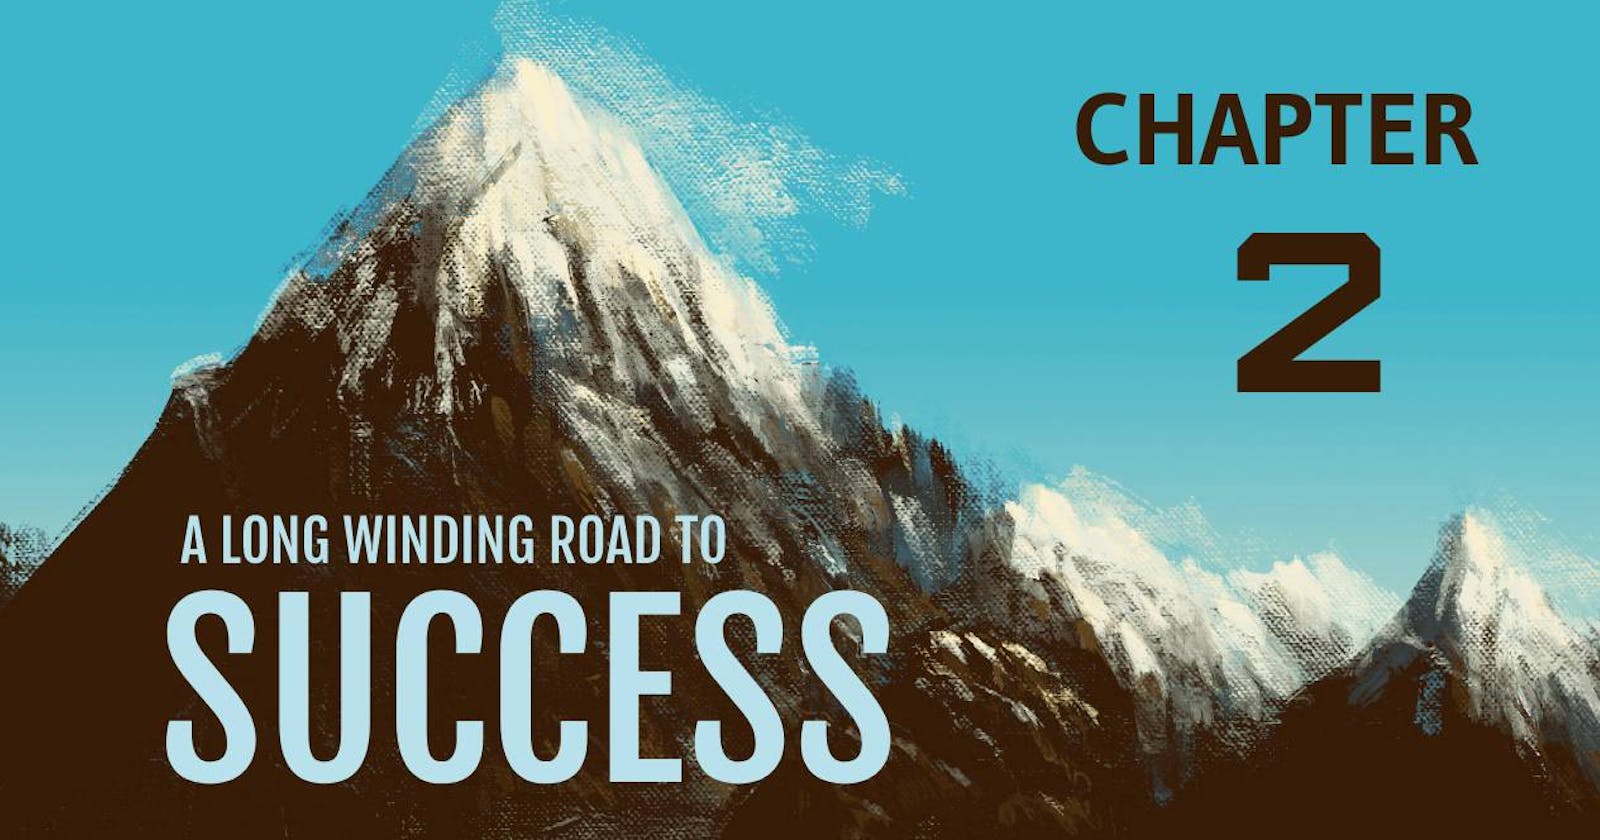 A long winding road to success - Chapter 2